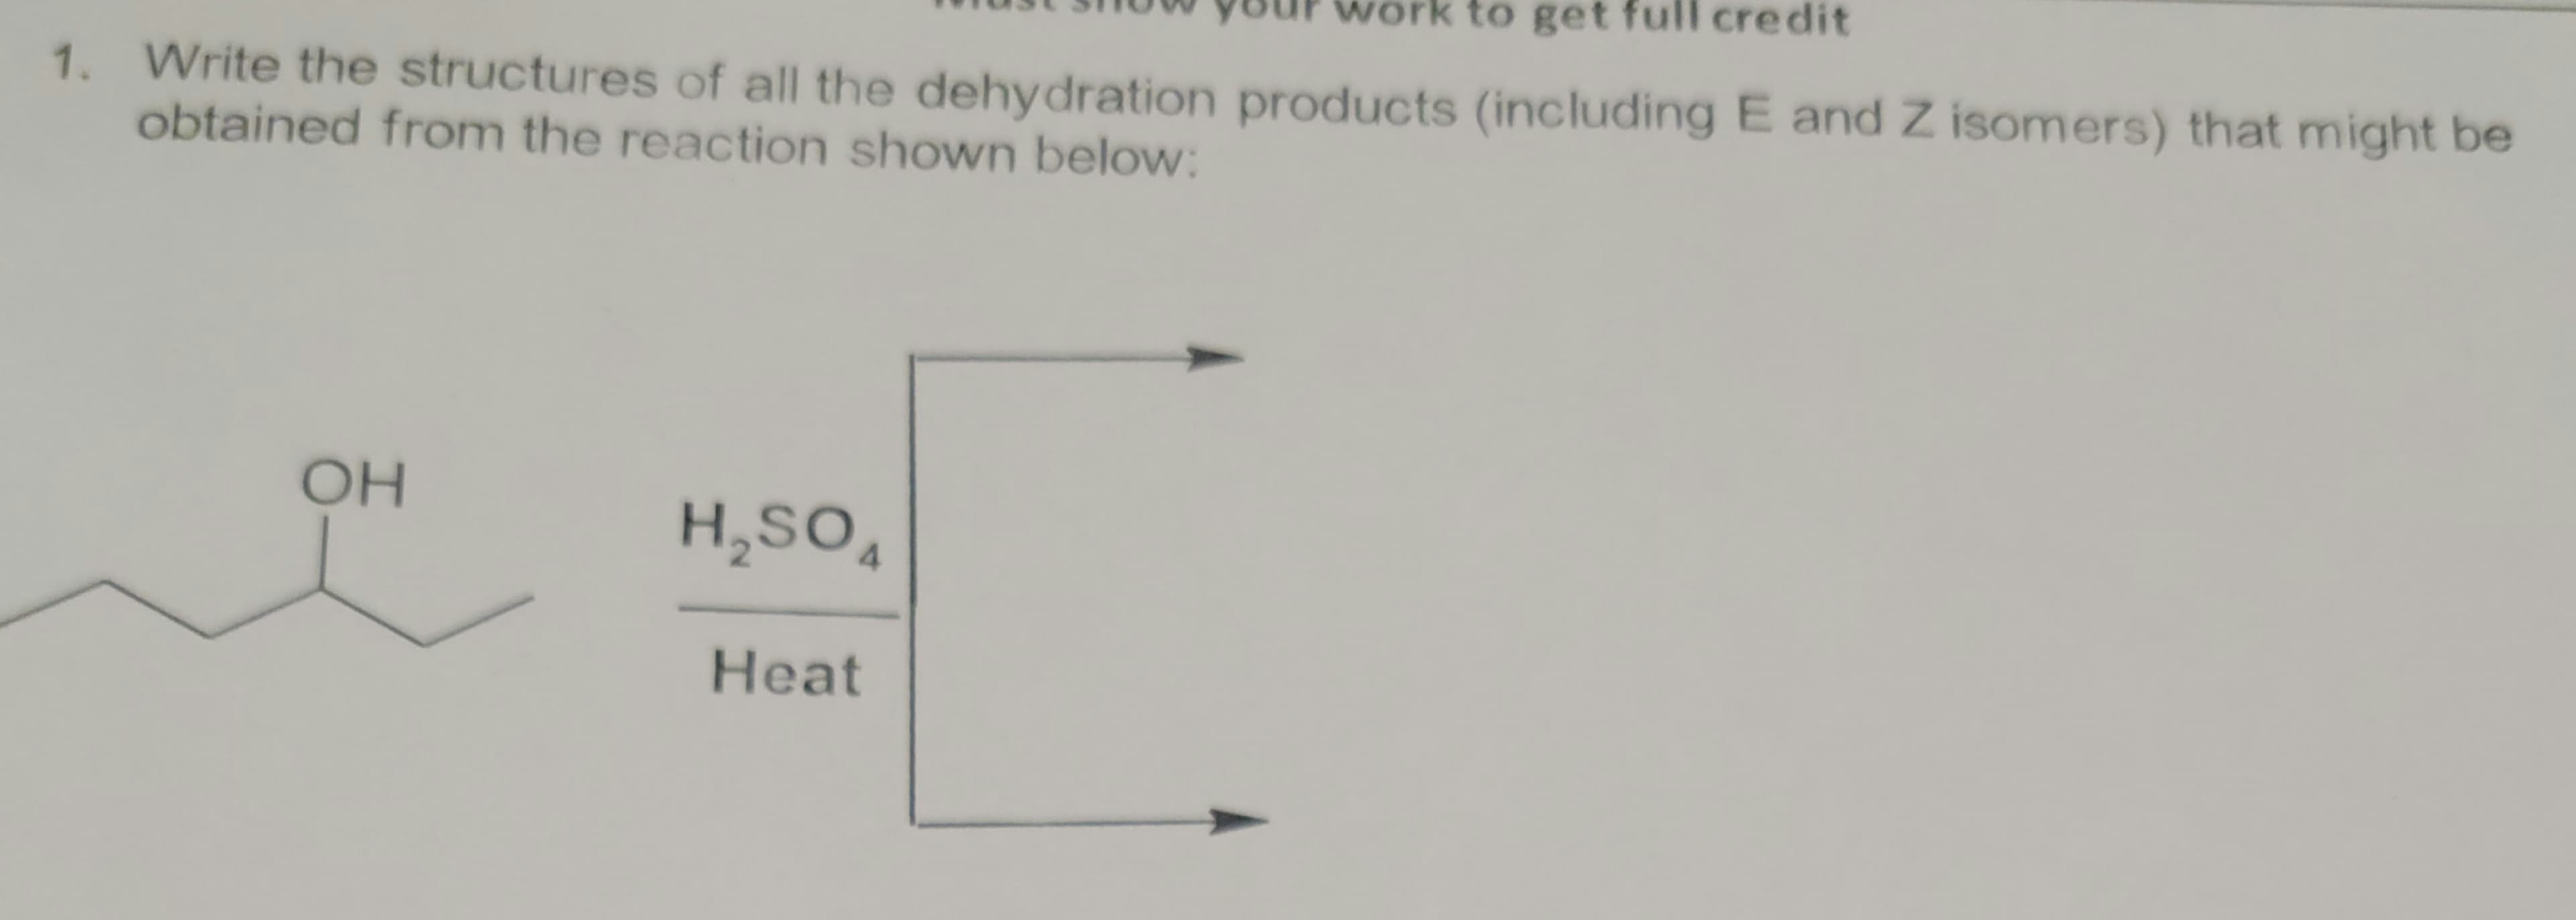 work to get full credit
1. Write the structures of all the dehydration products (including E and Z isomers) that might be
obtained from the reaction shown below:
OH
H,SO,
Heat
